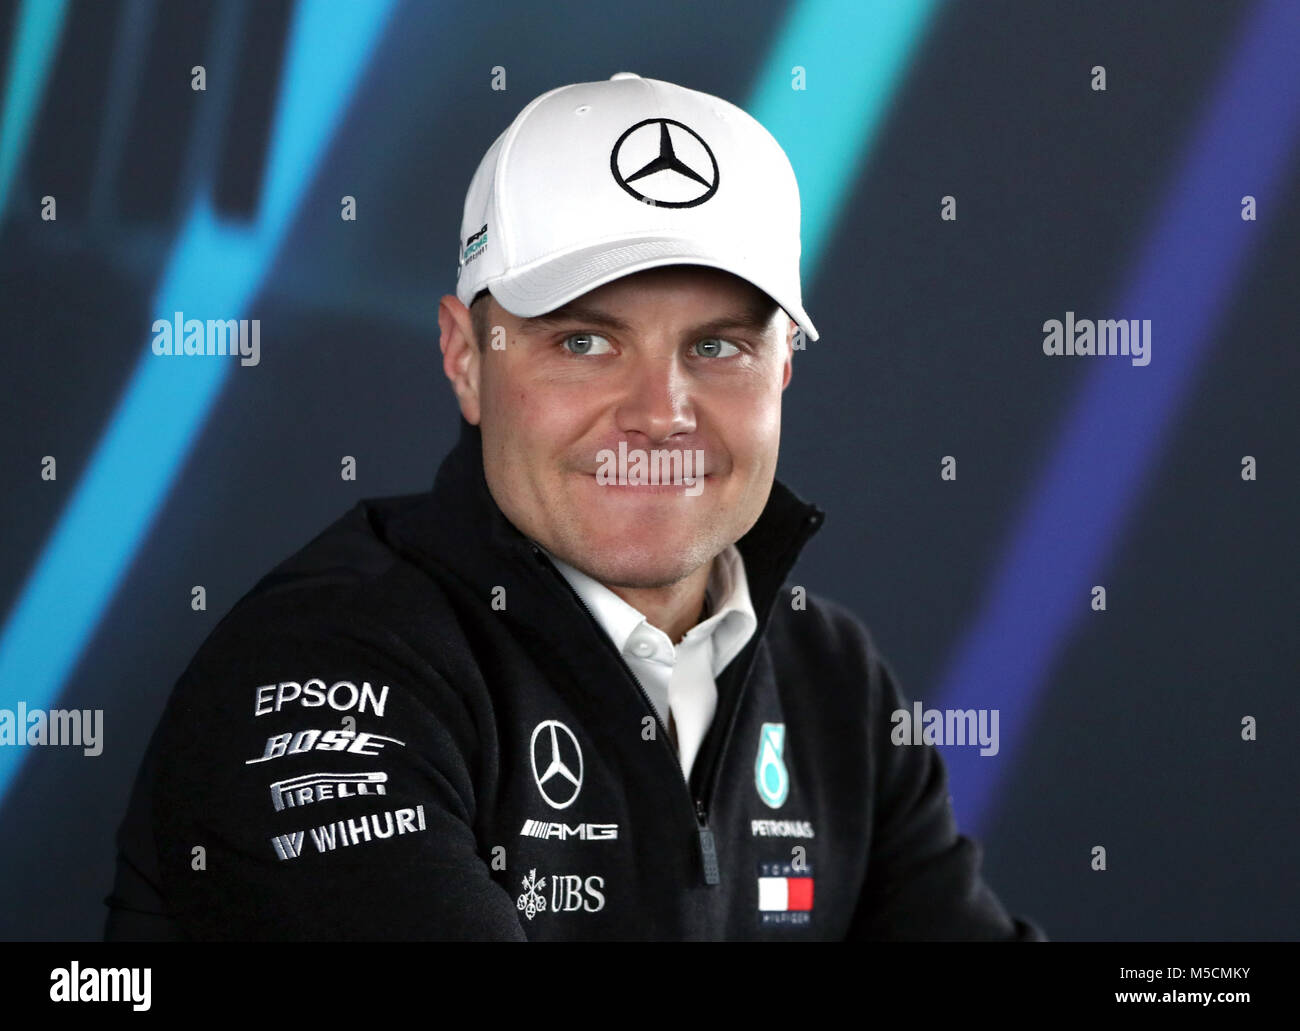 Mercedes Valtteri Bottas attends a press conference during the Mercedes-AMG F1 2018 car launch at Silverstone, Towcester. Stock Photo